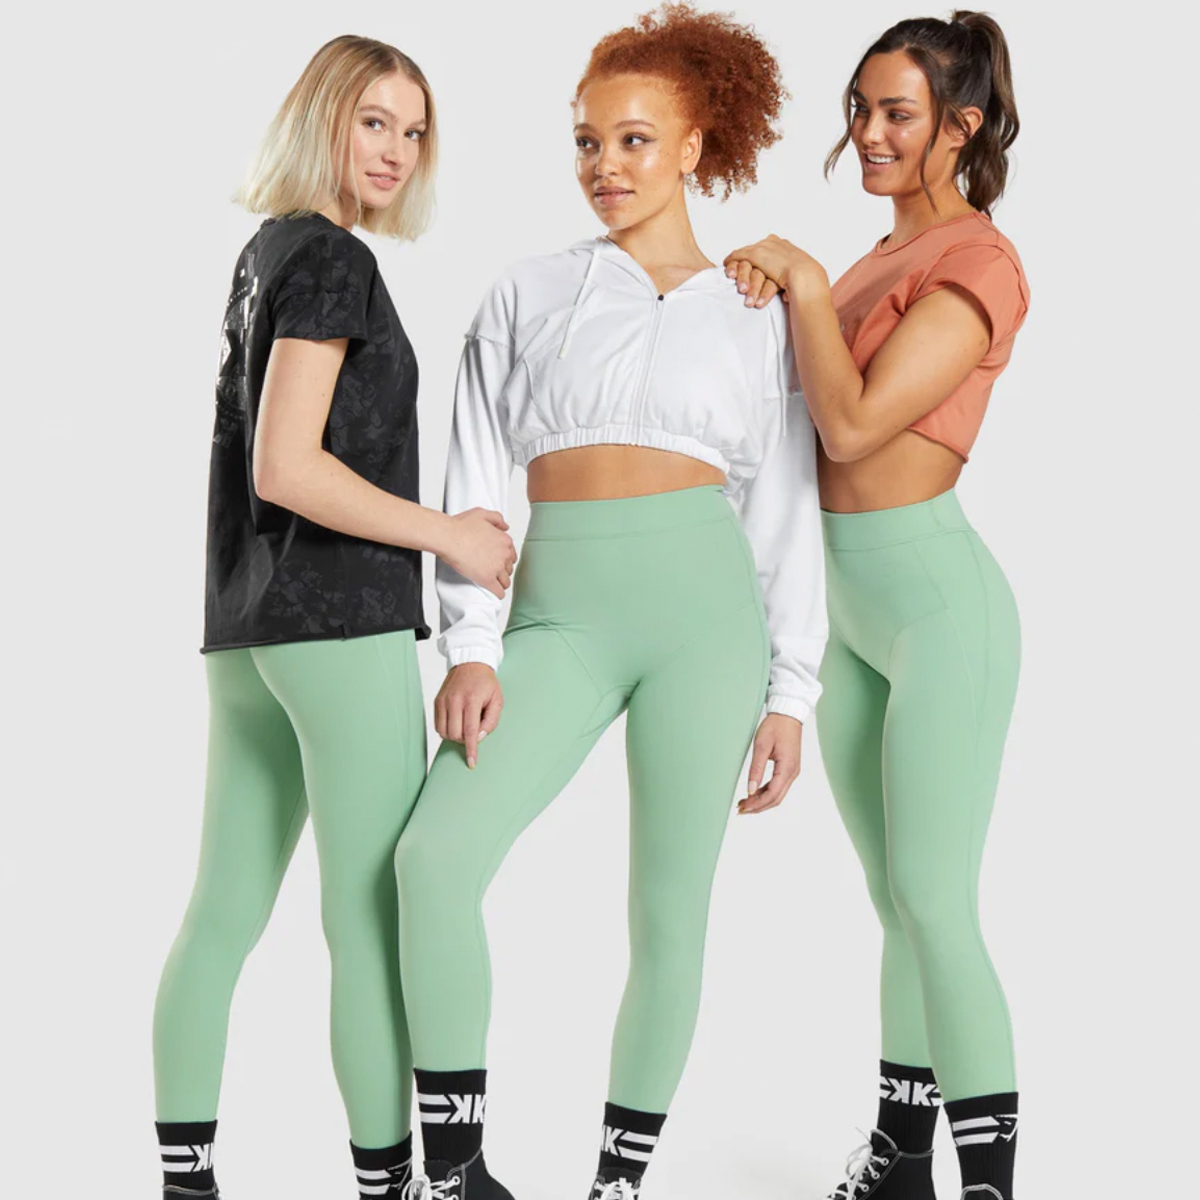 Gymshark 60% Off Deals: $10 Leggings, $18 Shorts, $17 Sports Bras, and More Can’t-Miss Buys – E! Online